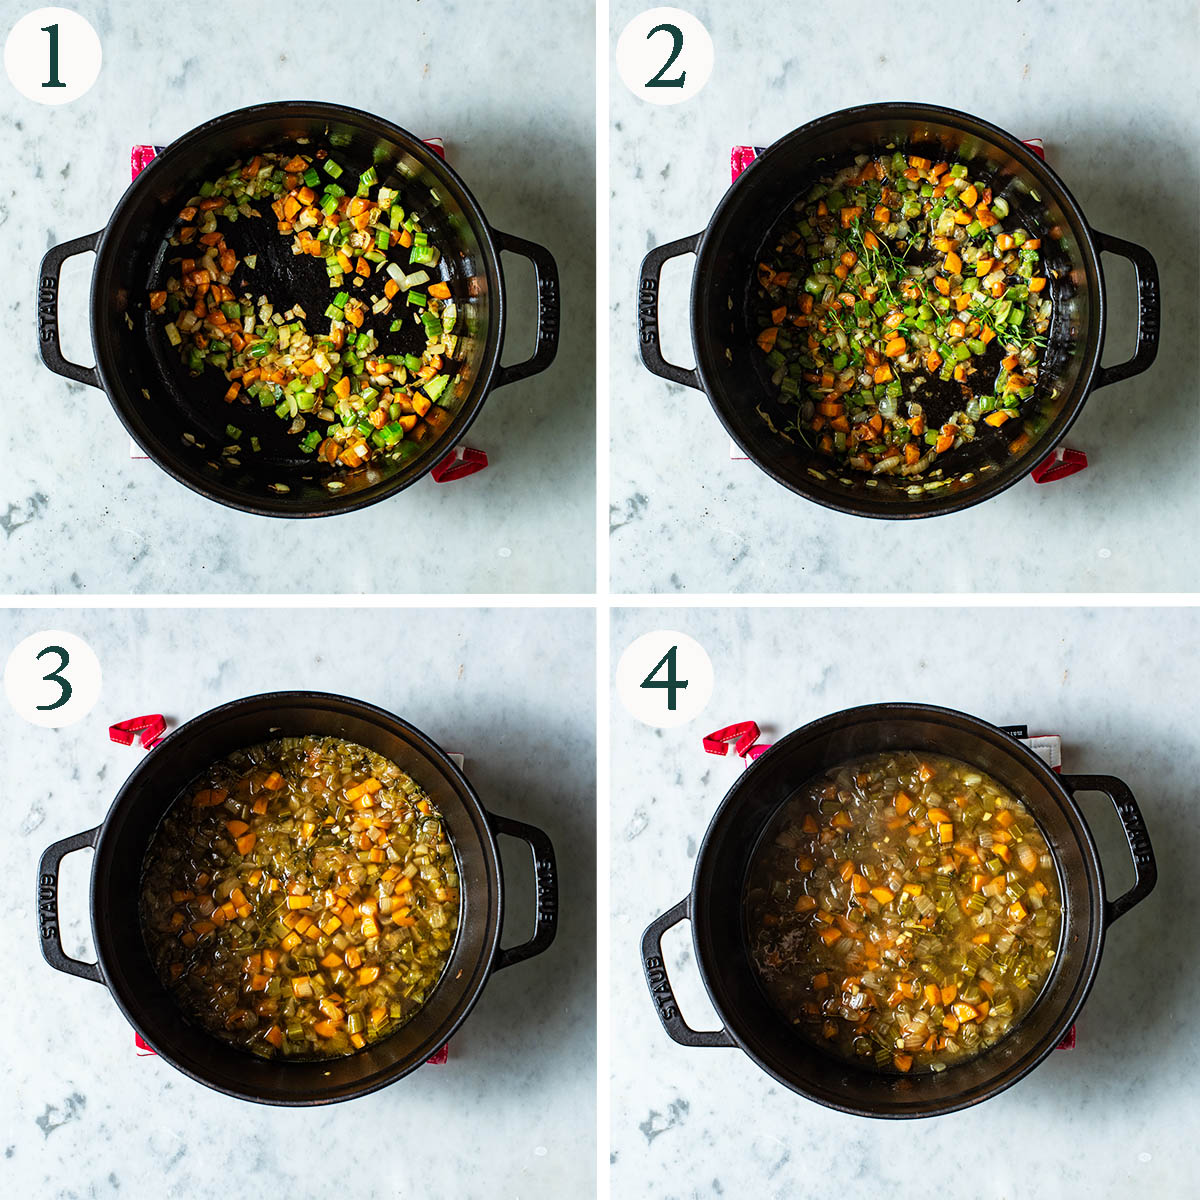 Gravy steps 1 to 4, cooking vegetables and gravy before and after thickening.